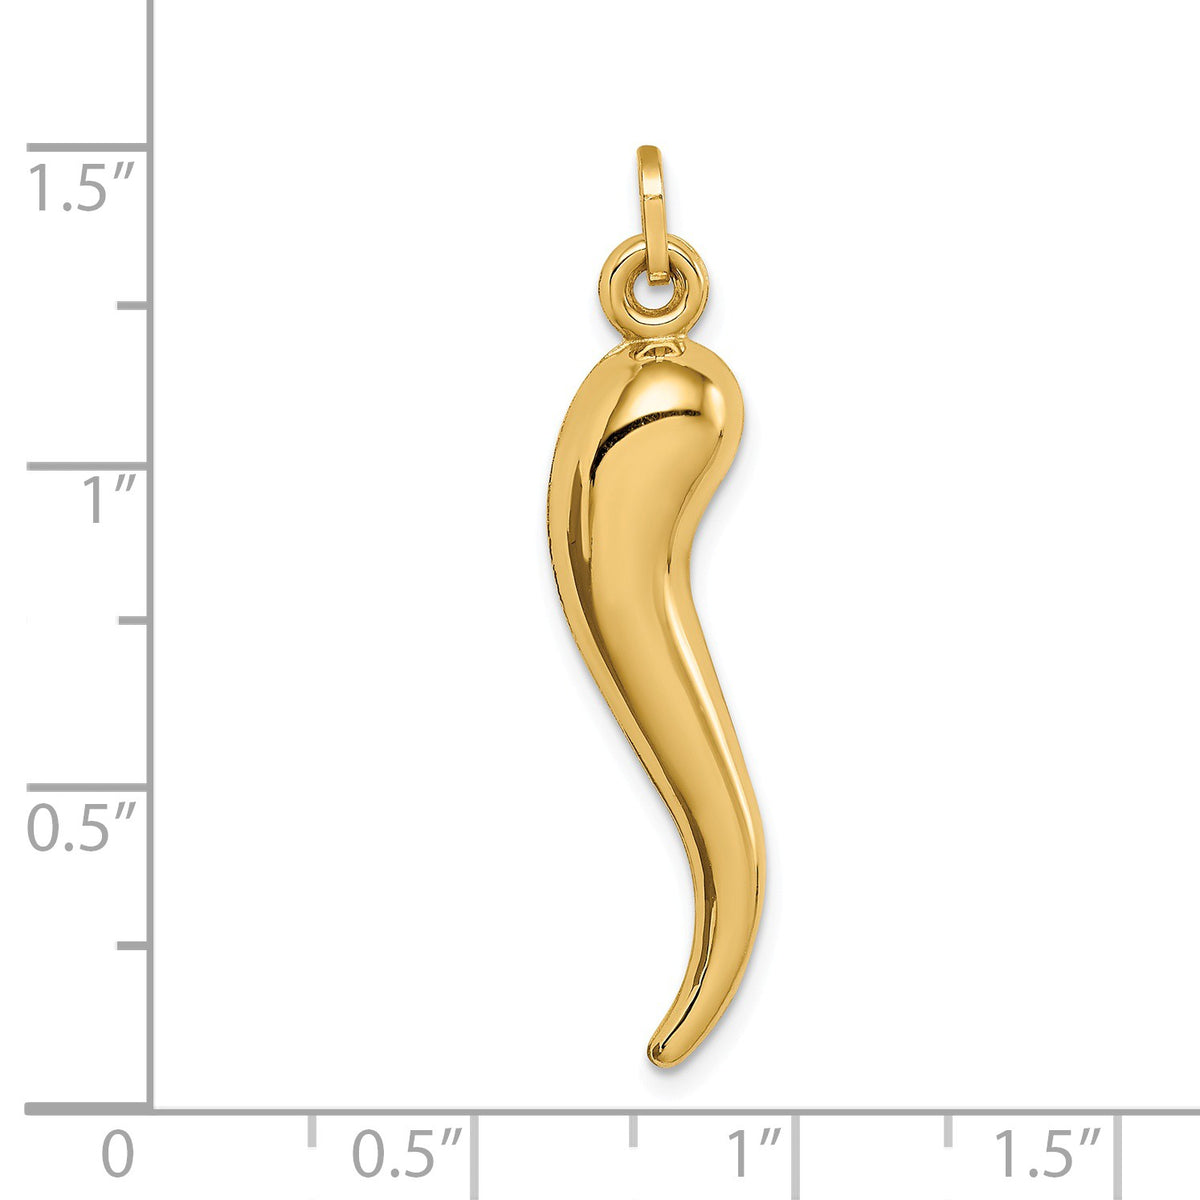 Alternate view of the 14k Yellow Gold Large 3D Hollow Italian Horn Pendant, 7 x 35mm by The Black Bow Jewelry Co.